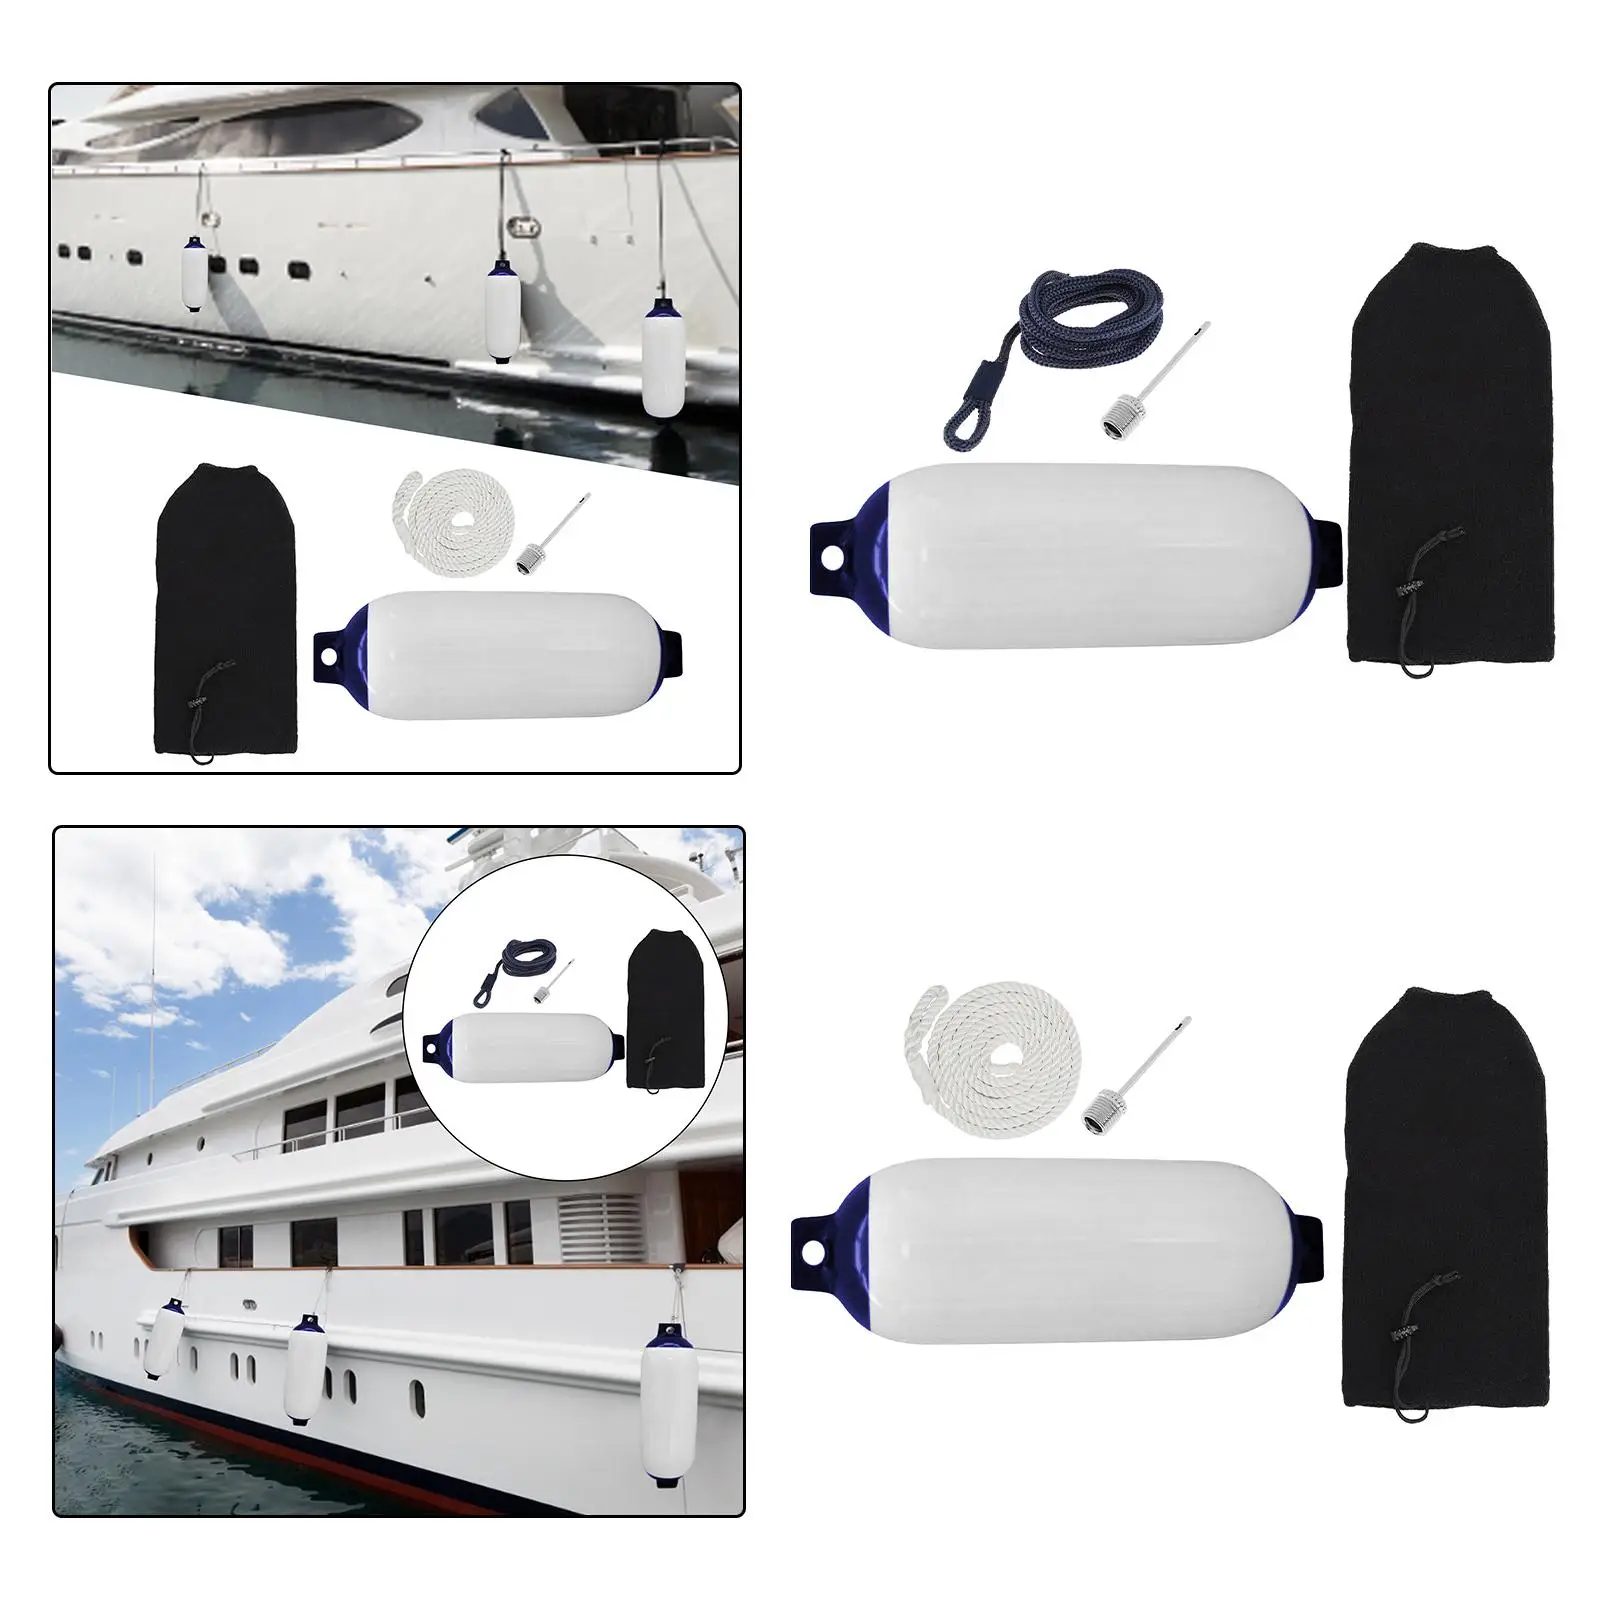 Marine Boat Fender Outdoor with Cover Buoys Protector Accessory Durable Boat Bumpers Fenders with Rope Boat Bumpers for Docking